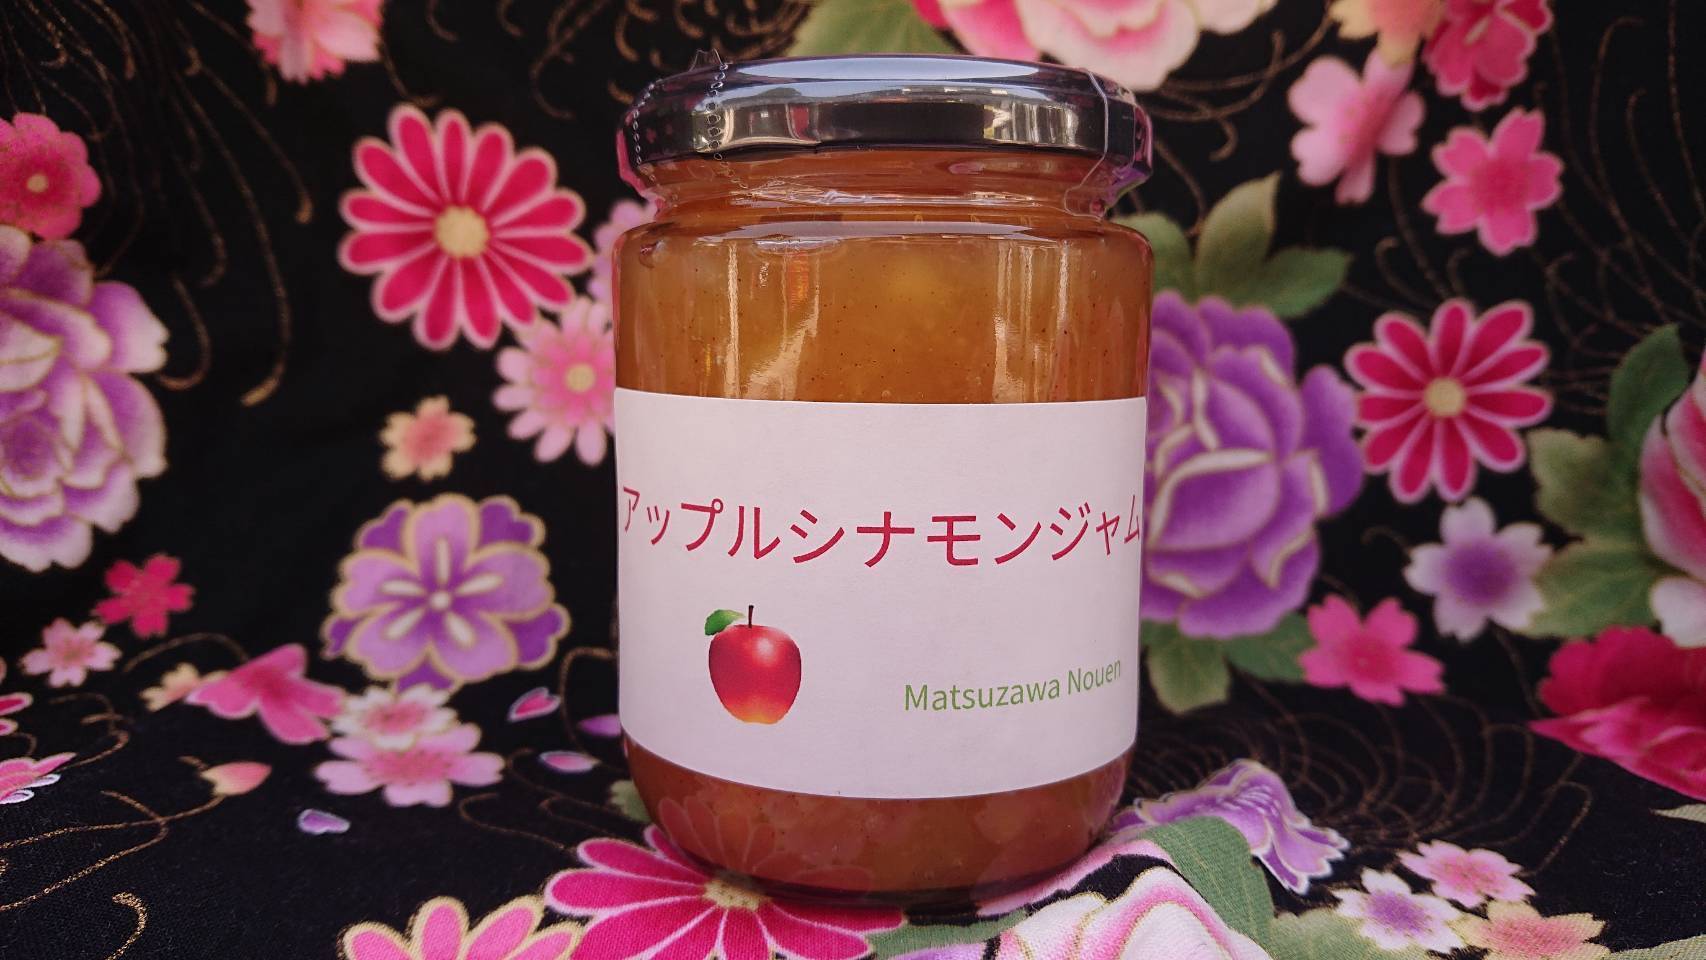 🍴 Eating choku ｜ New work "Apple cinnamon jam 260g" It is an exquisite combination of slightly fragrant cinnamon and apple sweetness and sourness. …